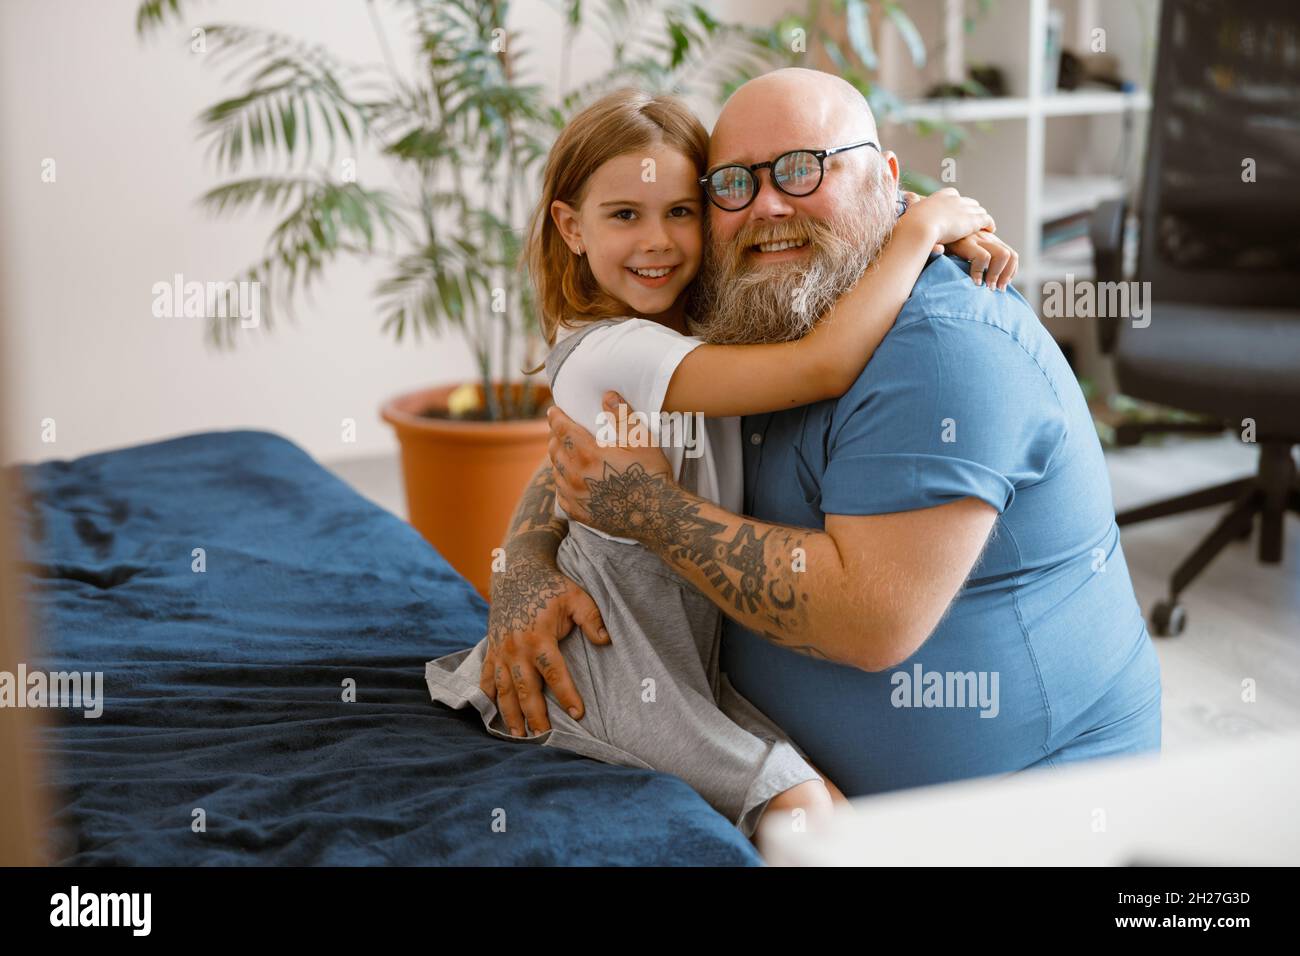 Smiling father with glasses embraces pretty daughter sitting on bed at home Stock Photo